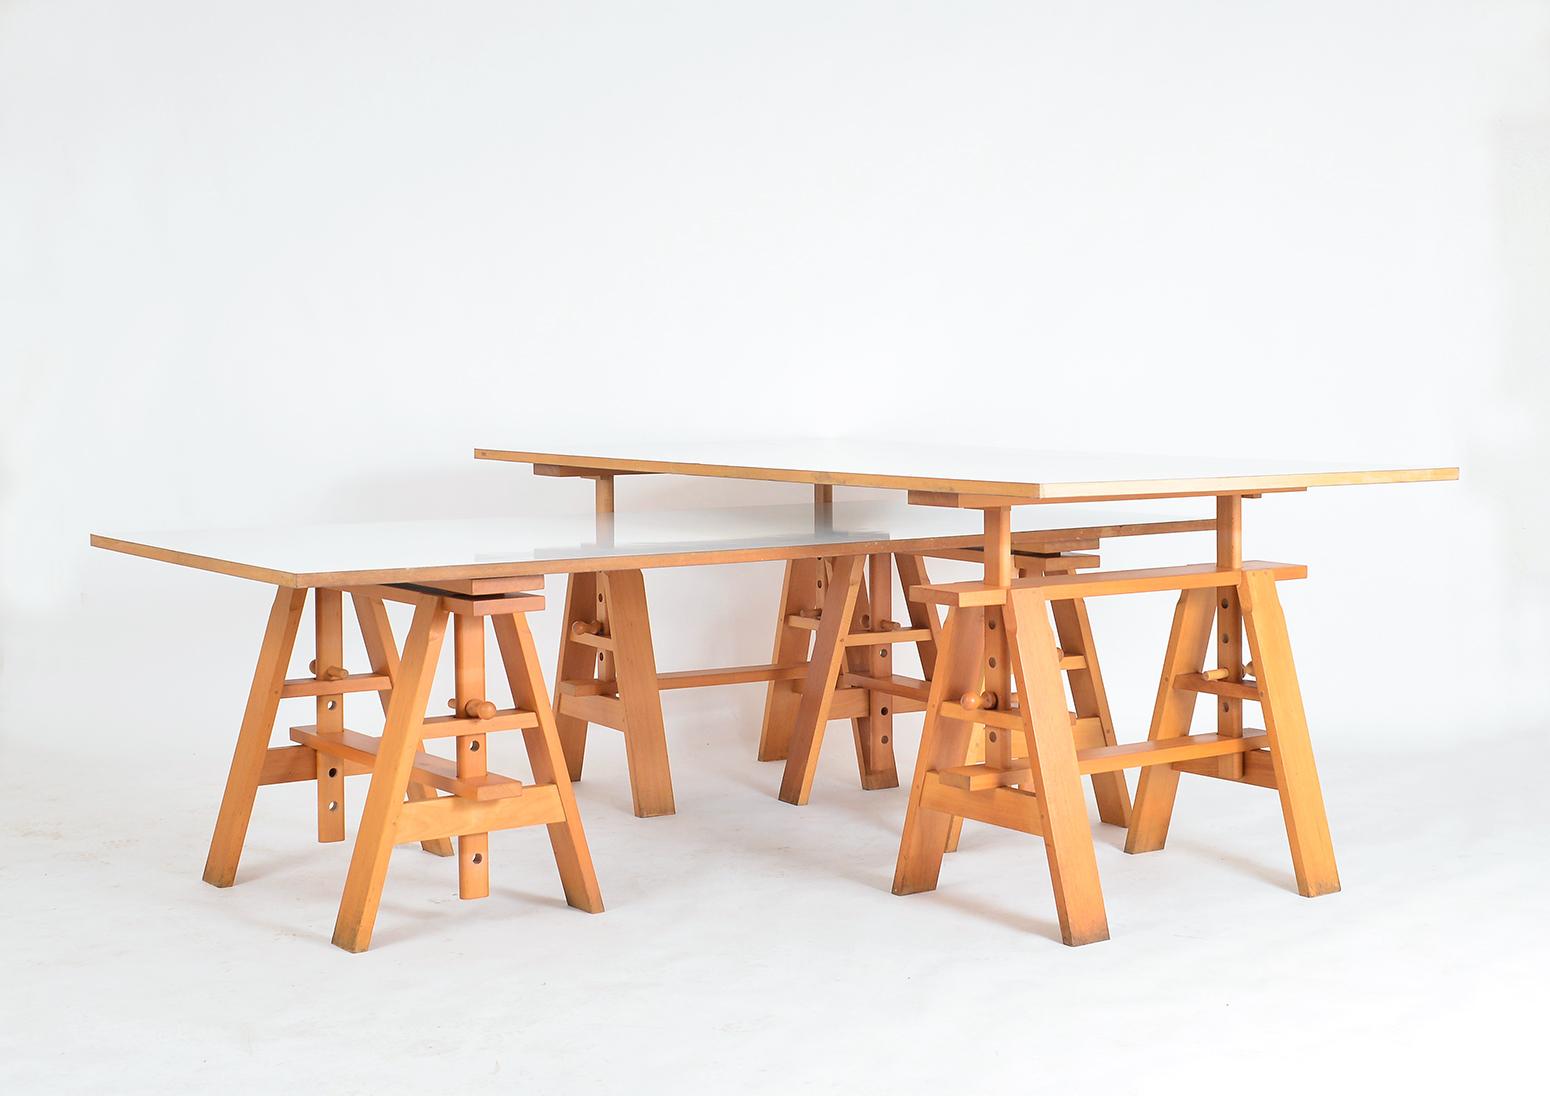 A rare opportunity to buy a pair of Leonardo desks designed by Achille Castiglioni for Zanotta, Italy. Reversable wooden top with white melamine on both sides, the easel base is of solid beech with pegged mortise and tenon joints. The trestles are